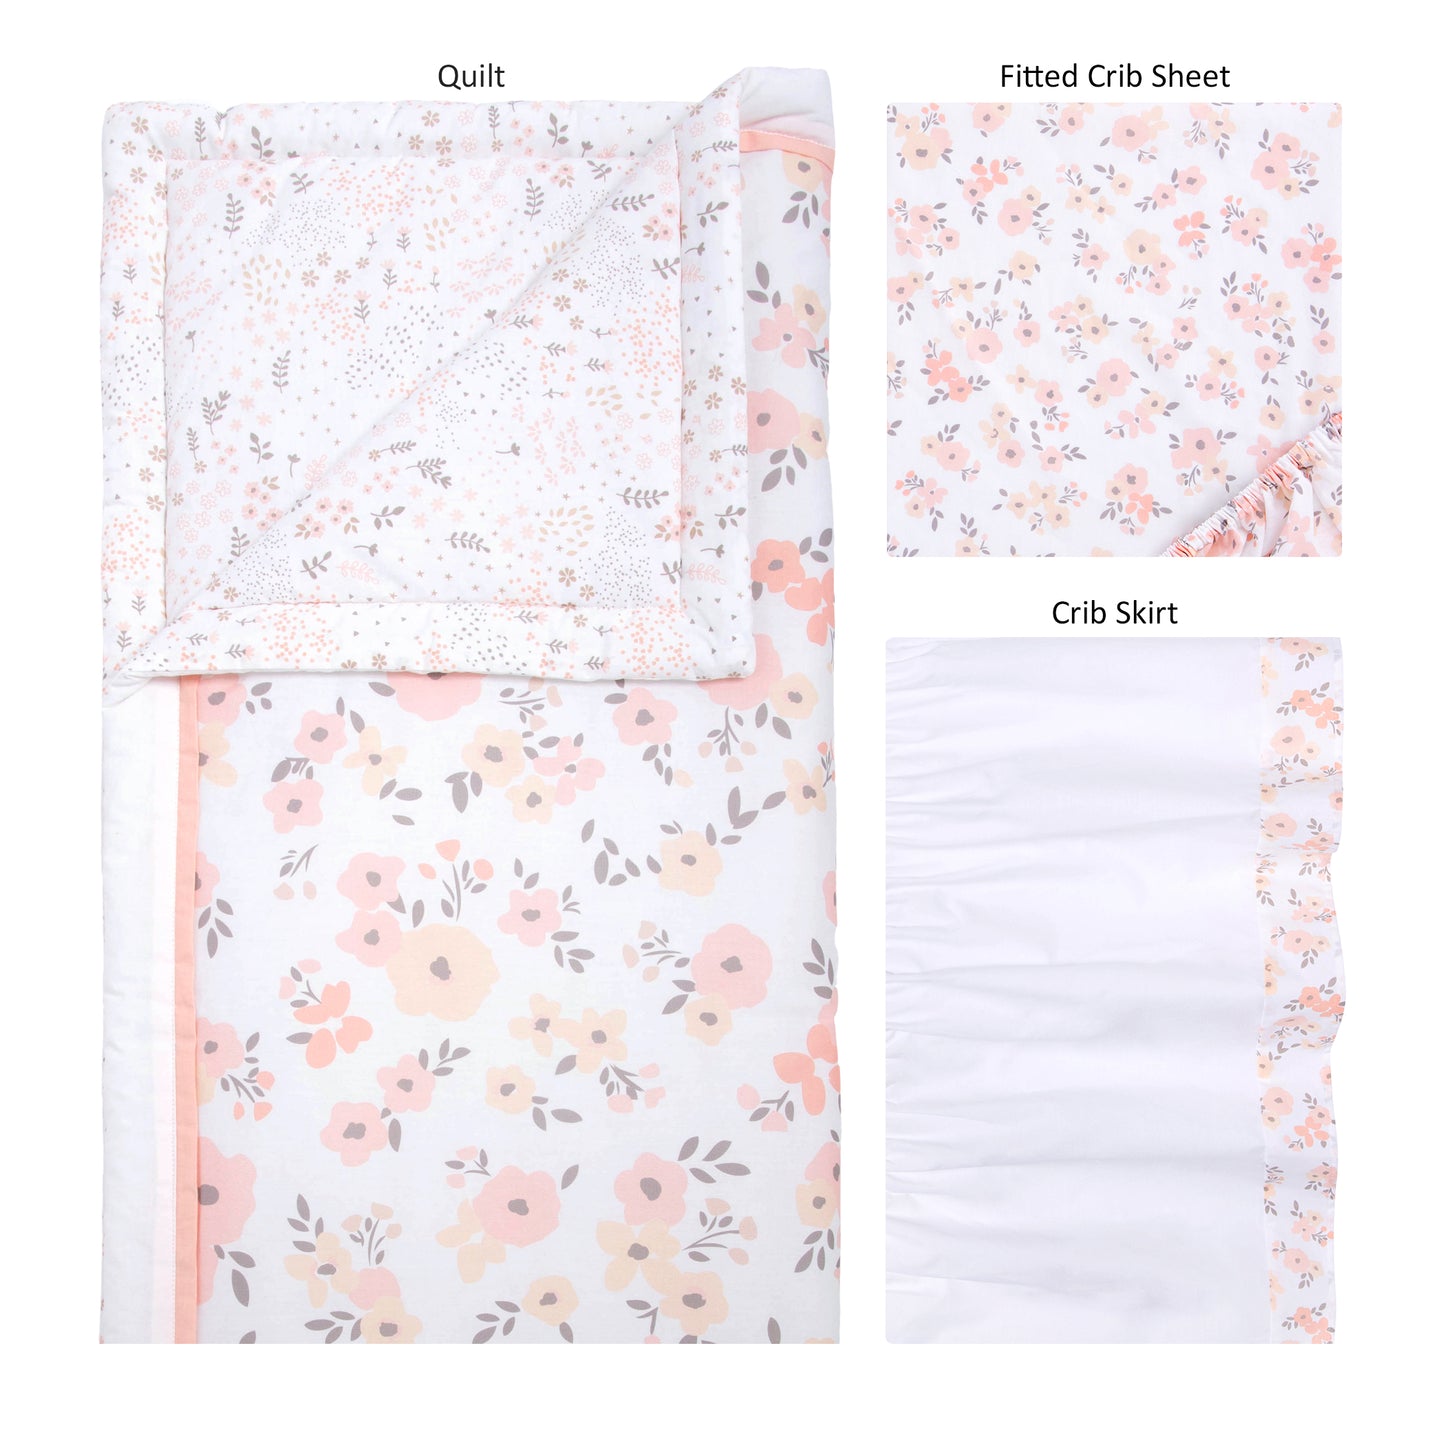  Blush Floral 3 Piece Crib Bedding Set- pieces laid out which includes a reversible crib quilt, crib sheet and crib skirt